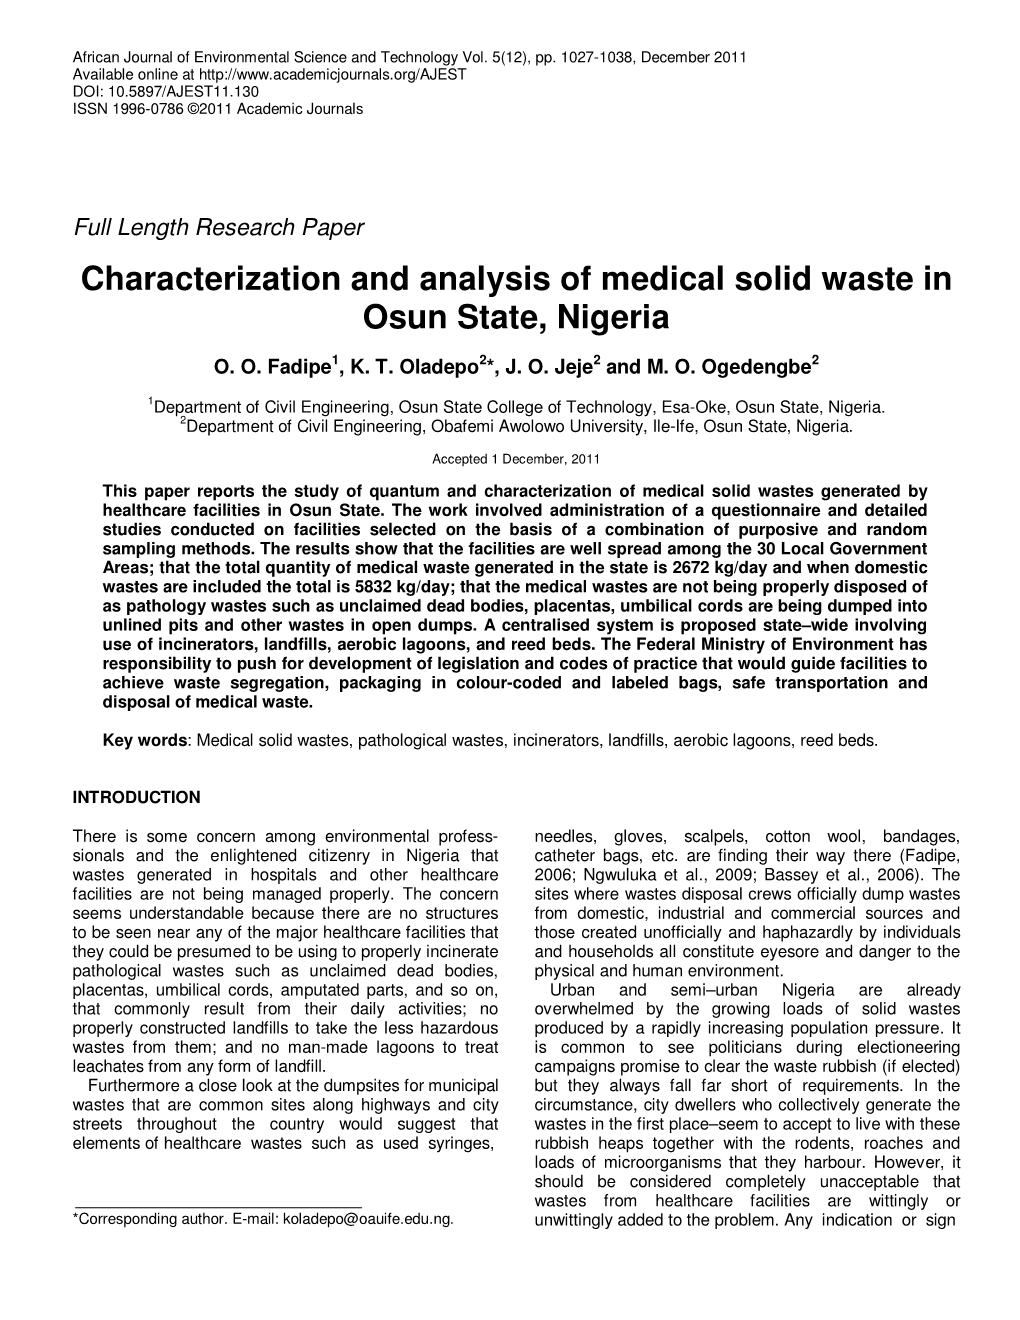 Characterization and Analysis of Medical Solid Waste in Osun State, Nigeria